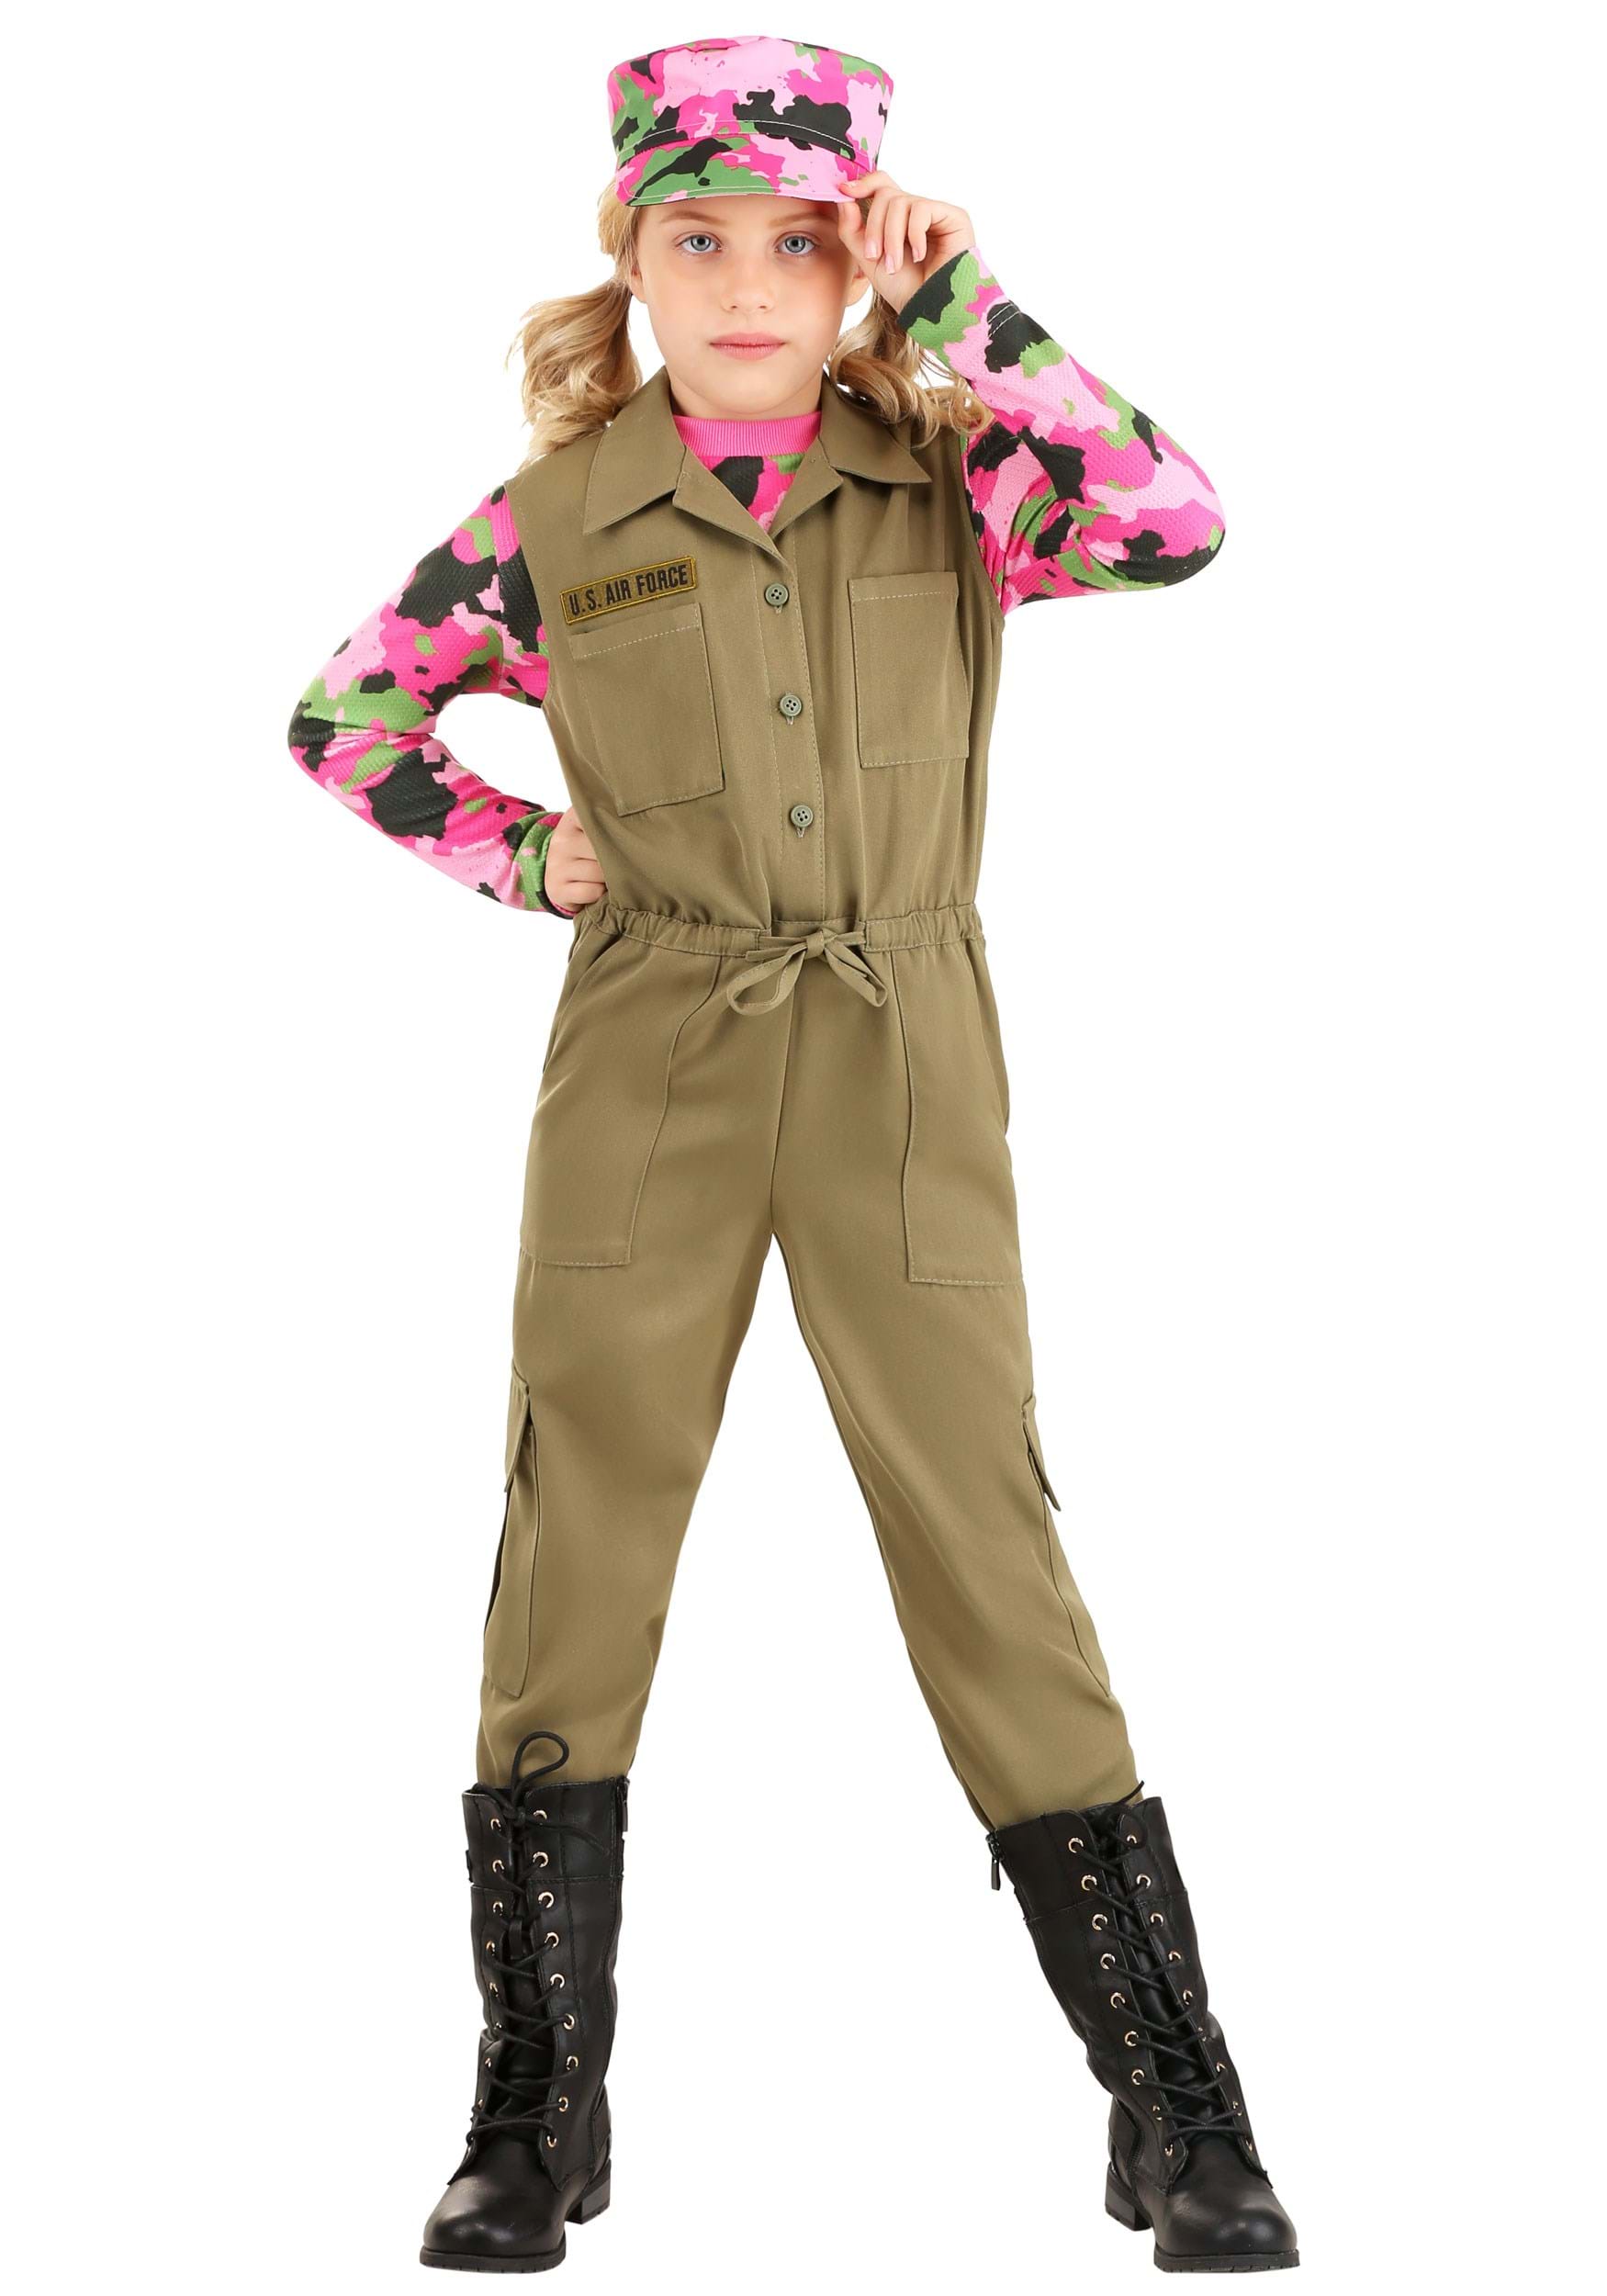 Photos - Fancy Dress FUN Costumes Pink Camo Army Costume for Girl's Pink/Green